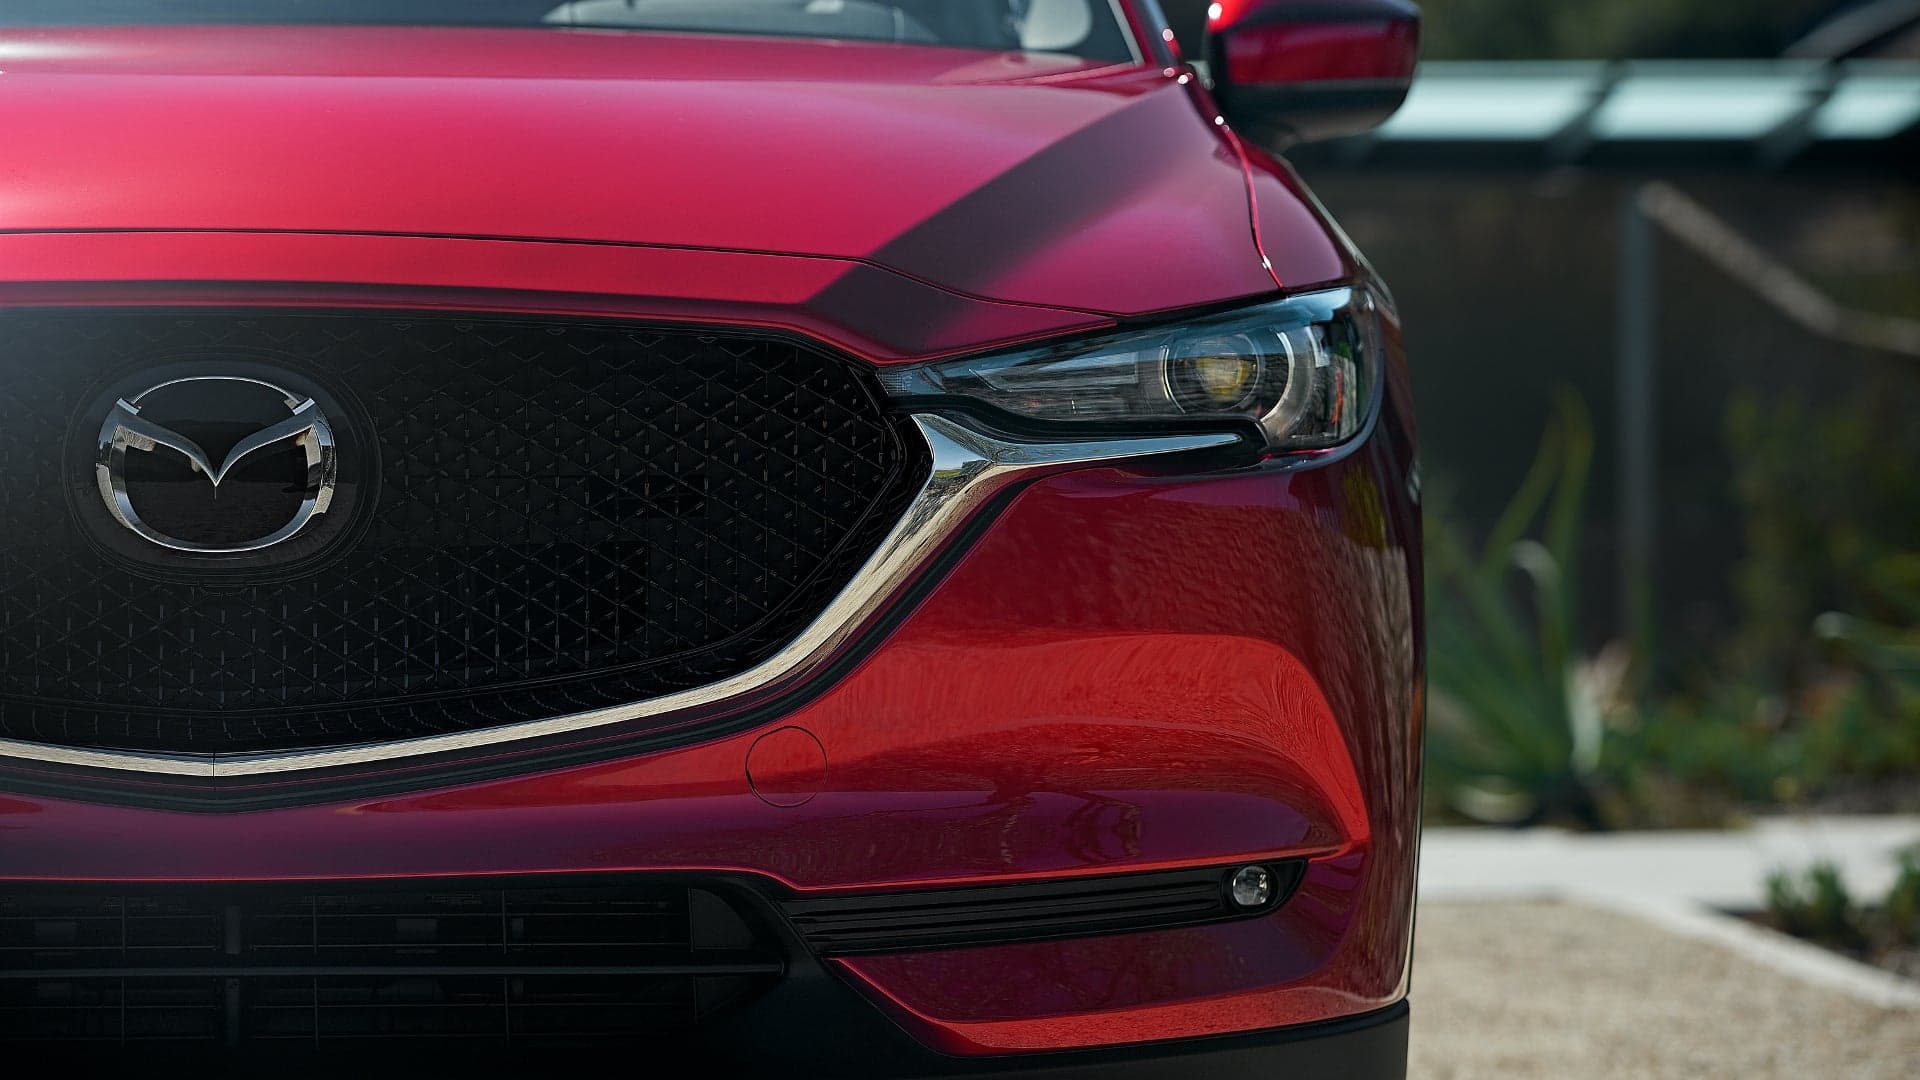 Turbocharged 2019 Mazda CX-5 Will Start At $34,870, According to Leaked Document